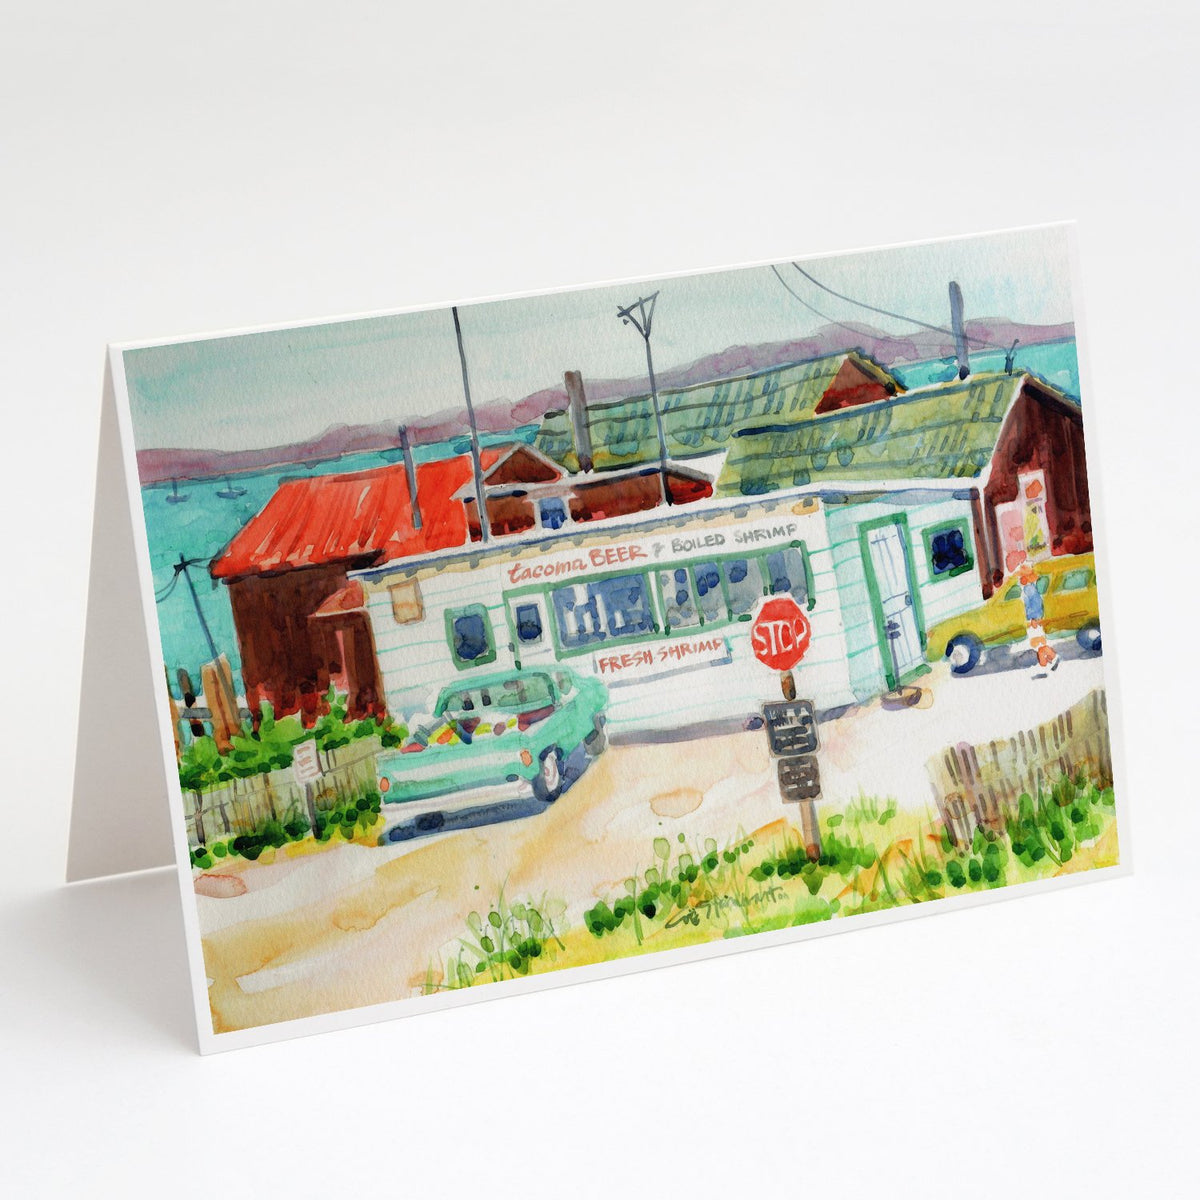 Buy this Tacoma Beer and Boiled Shrimp Market Greeting Cards and Envelopes Pack of 8